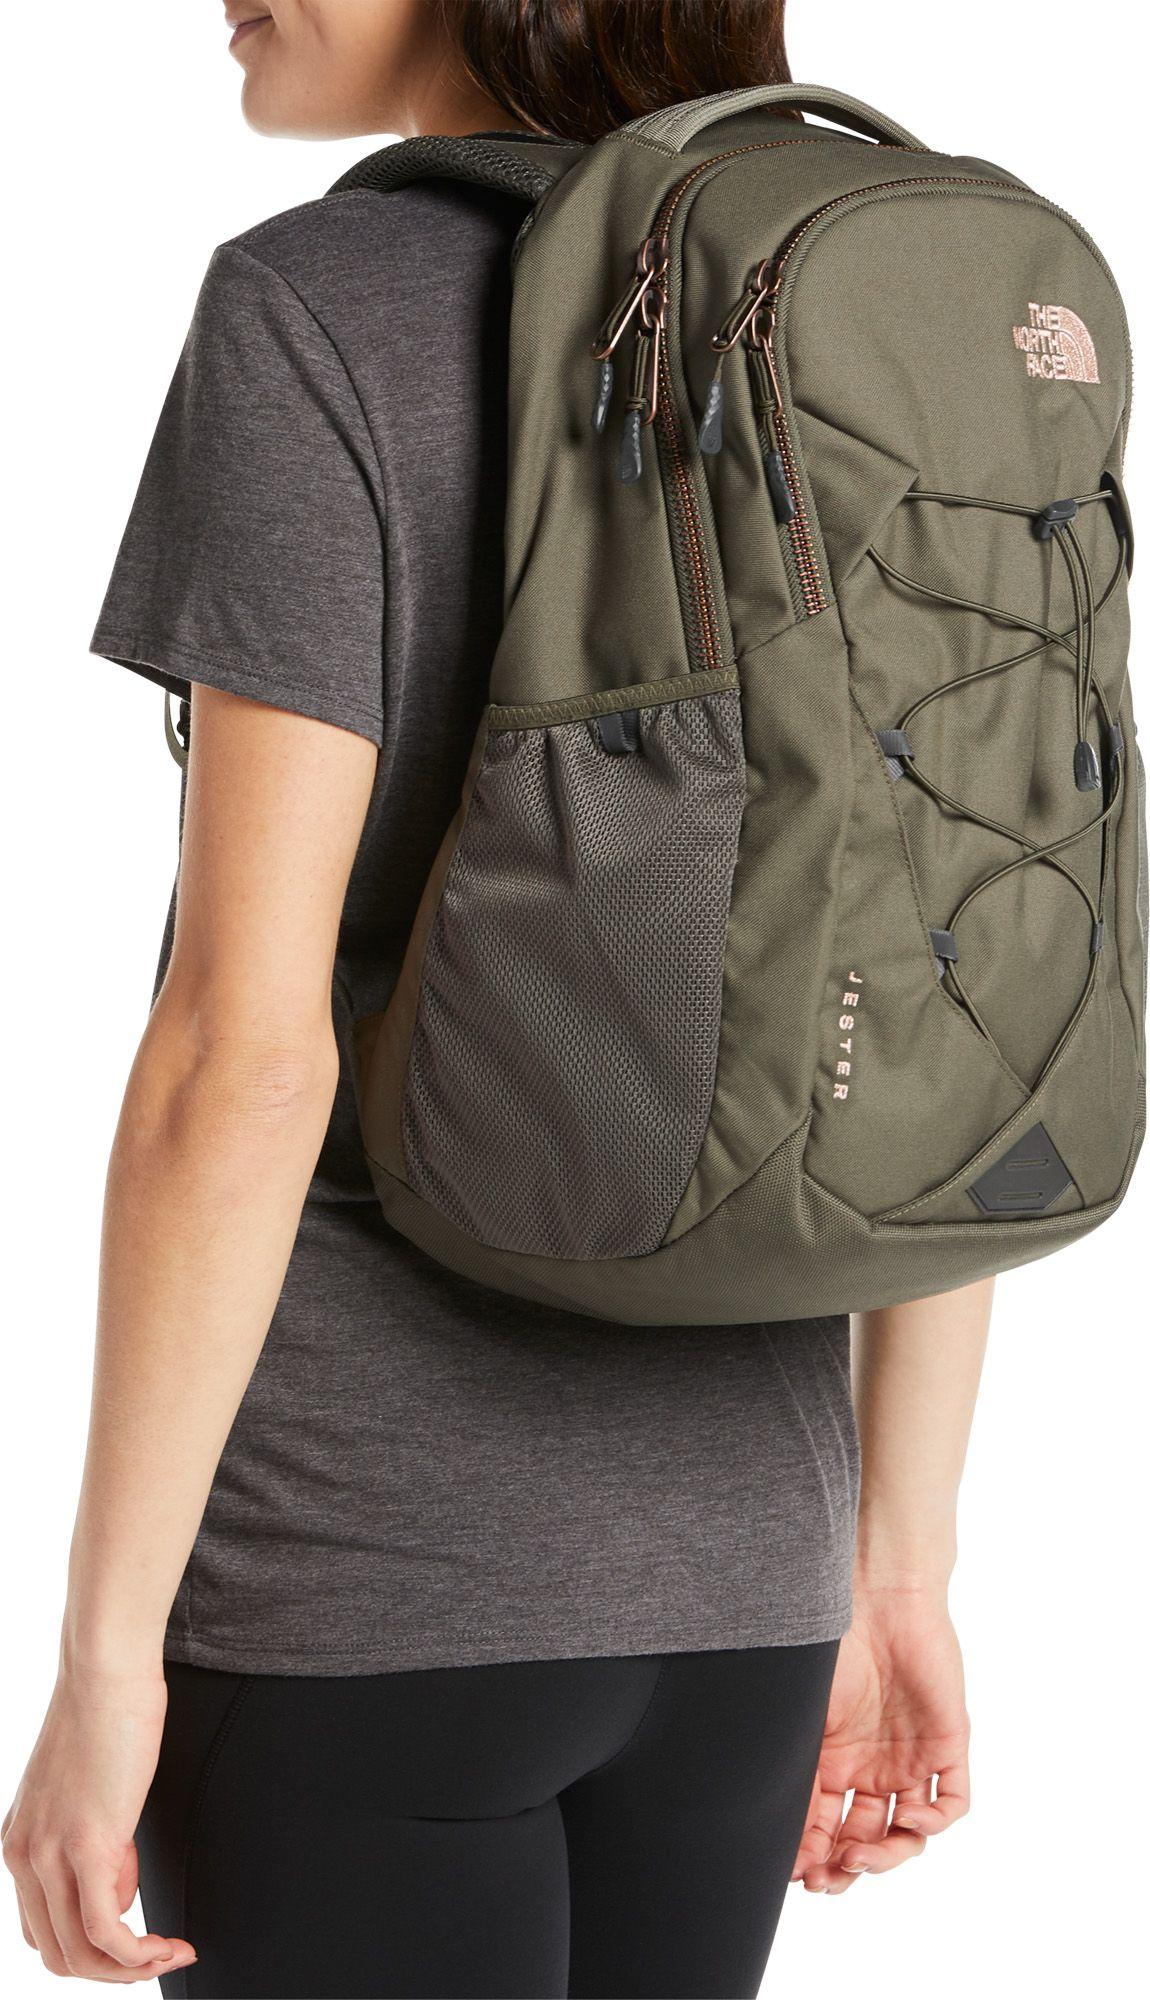 jester luxe backpack